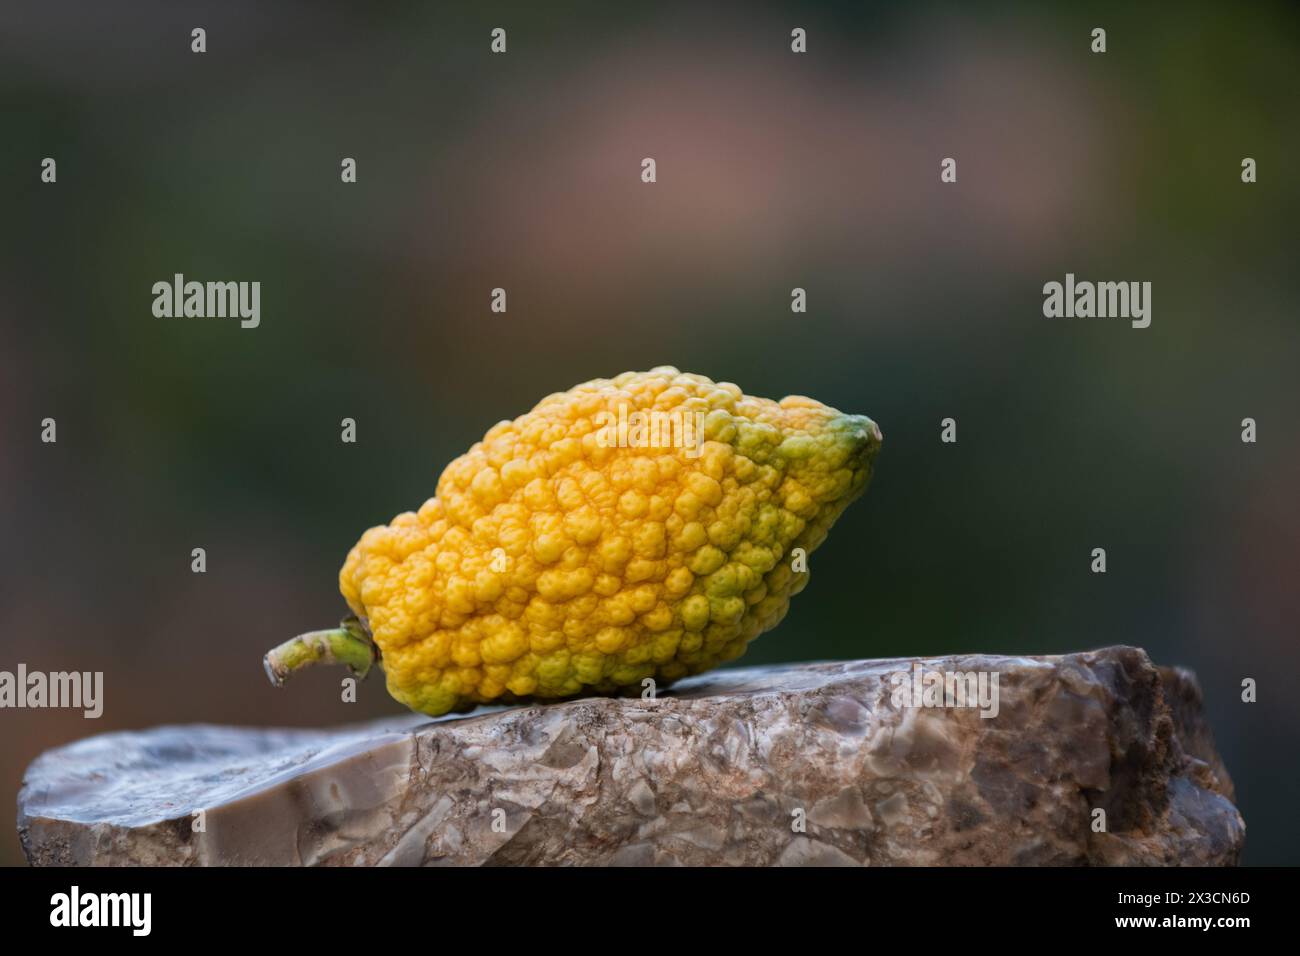 A single, multi-colored, yellow and green etrog or citron fruit, one of the four plant species used in the ritual observance of the Jewish holiday of Stock Photo